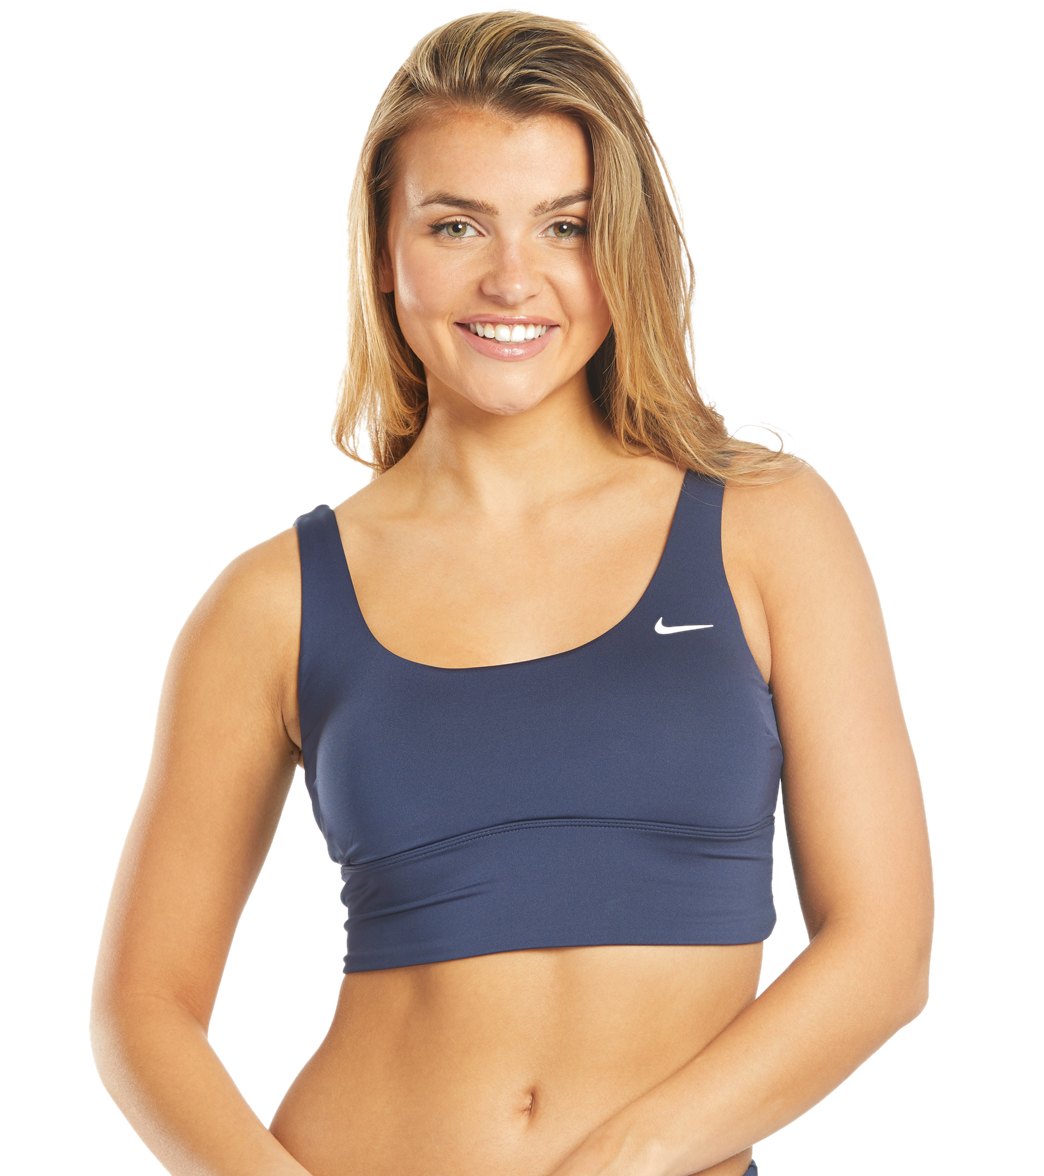 Nike Women's Essential Scoop Neck Midkini Top at SwimOutlet.com